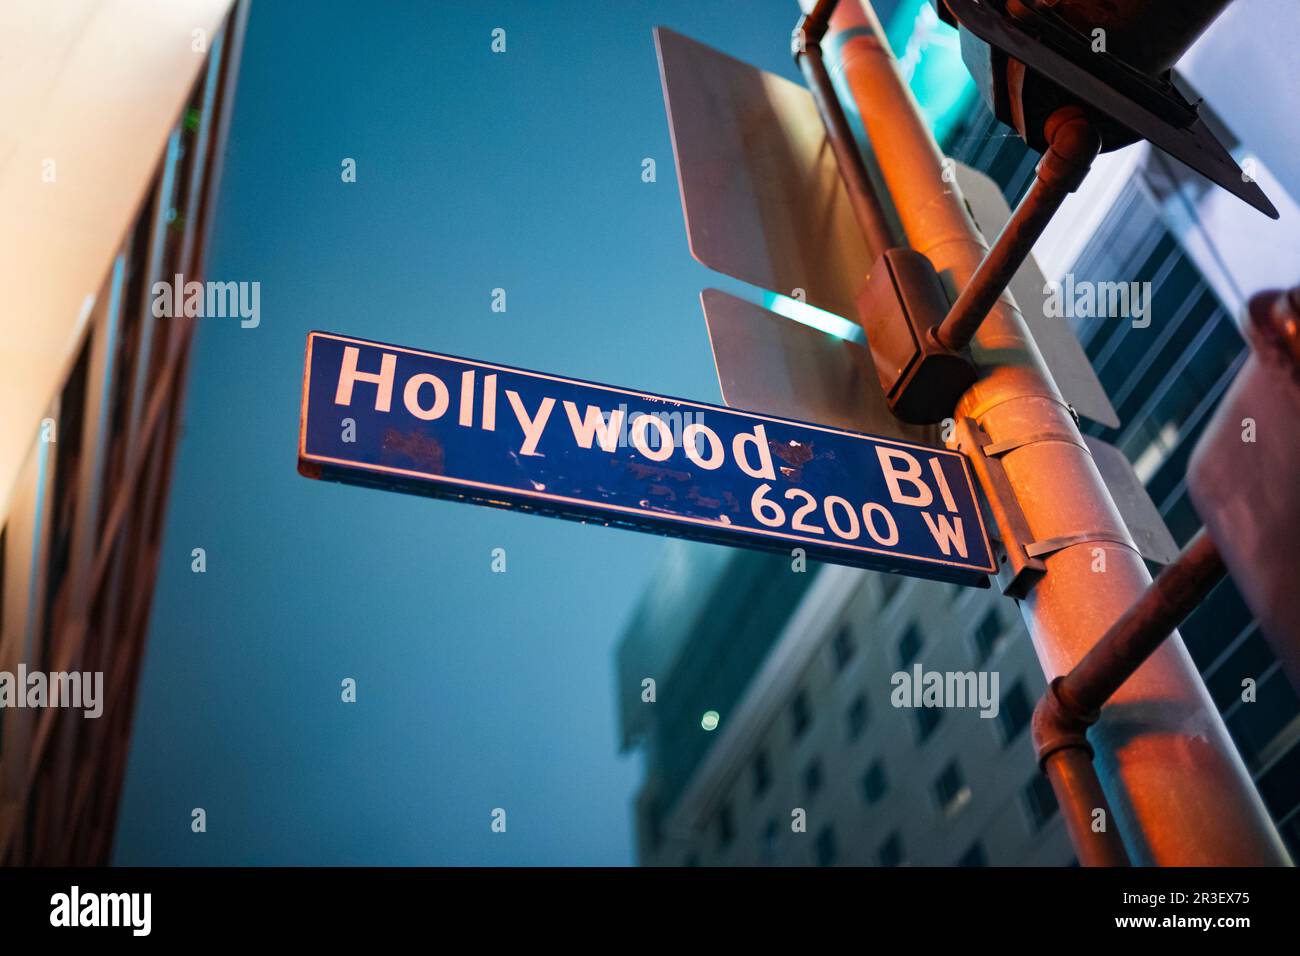 Upward looking angle of a Hollywood Boulevard street sign is illumniated by the lights of the City of Los Angeles during a cloudy night. Stock Photo